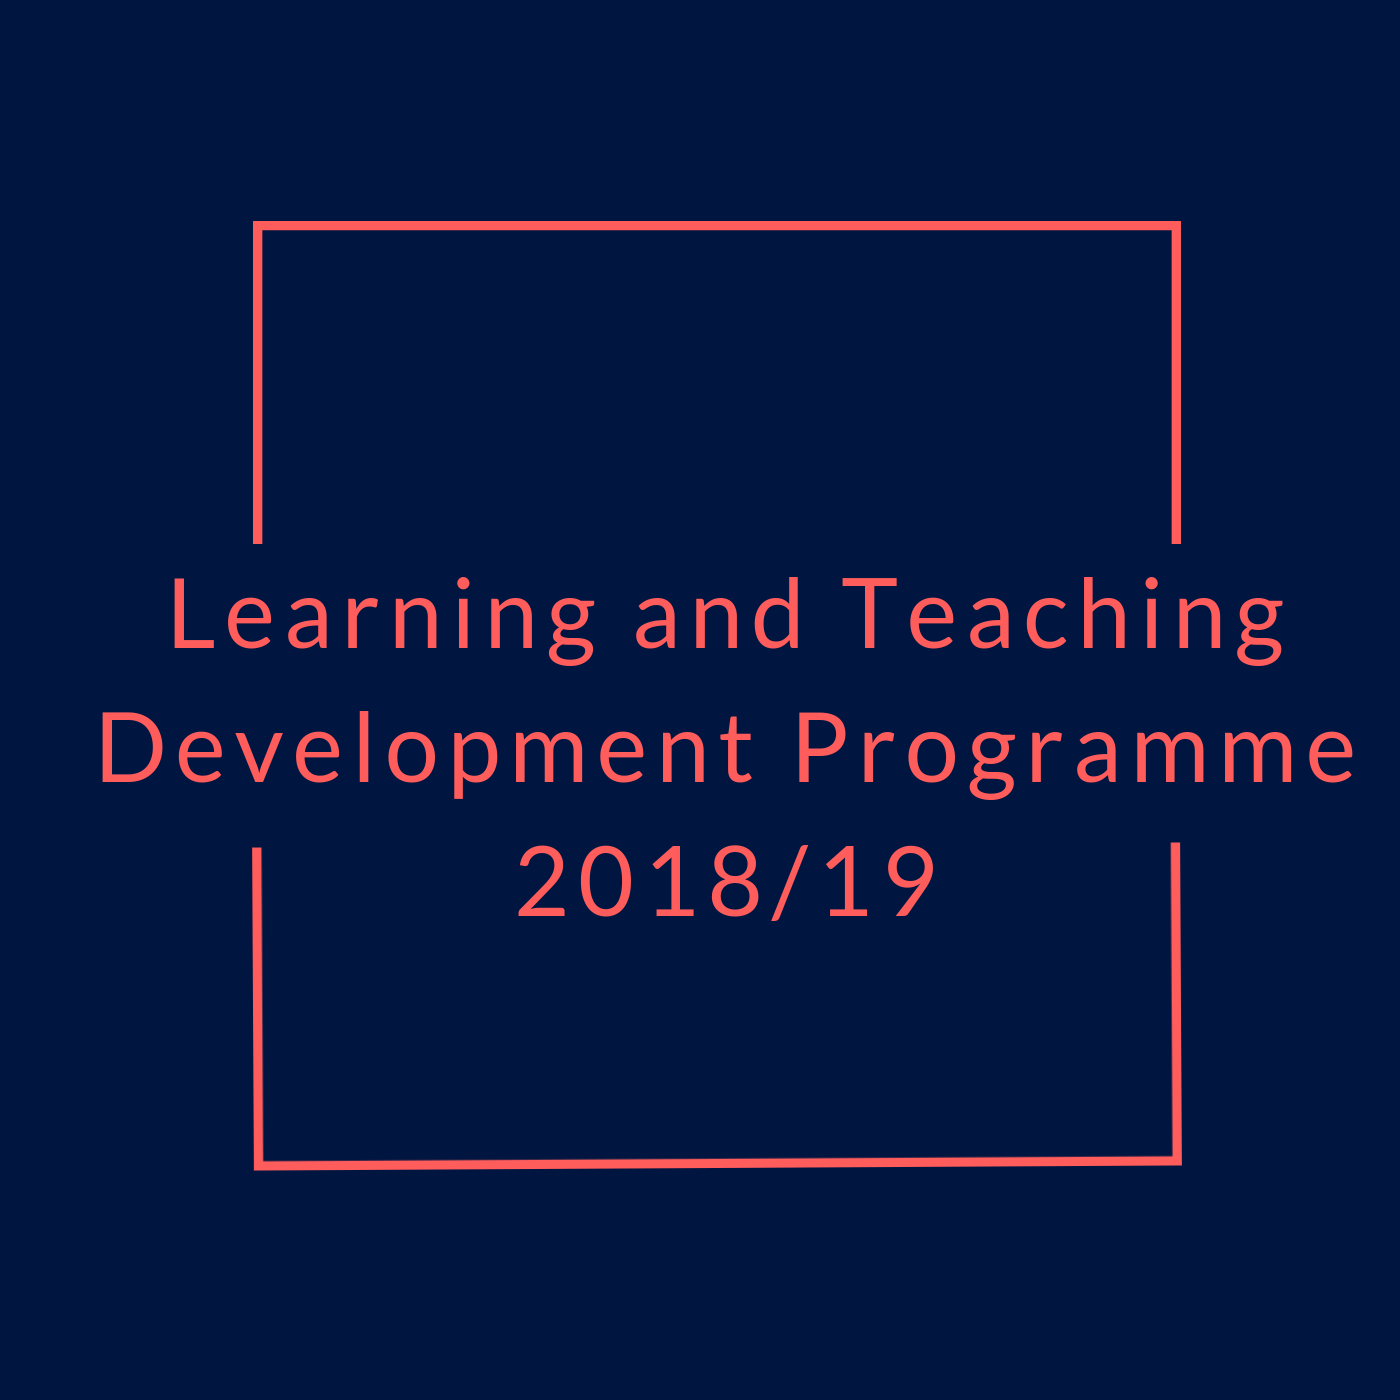 Learning and Teaching Development Programme